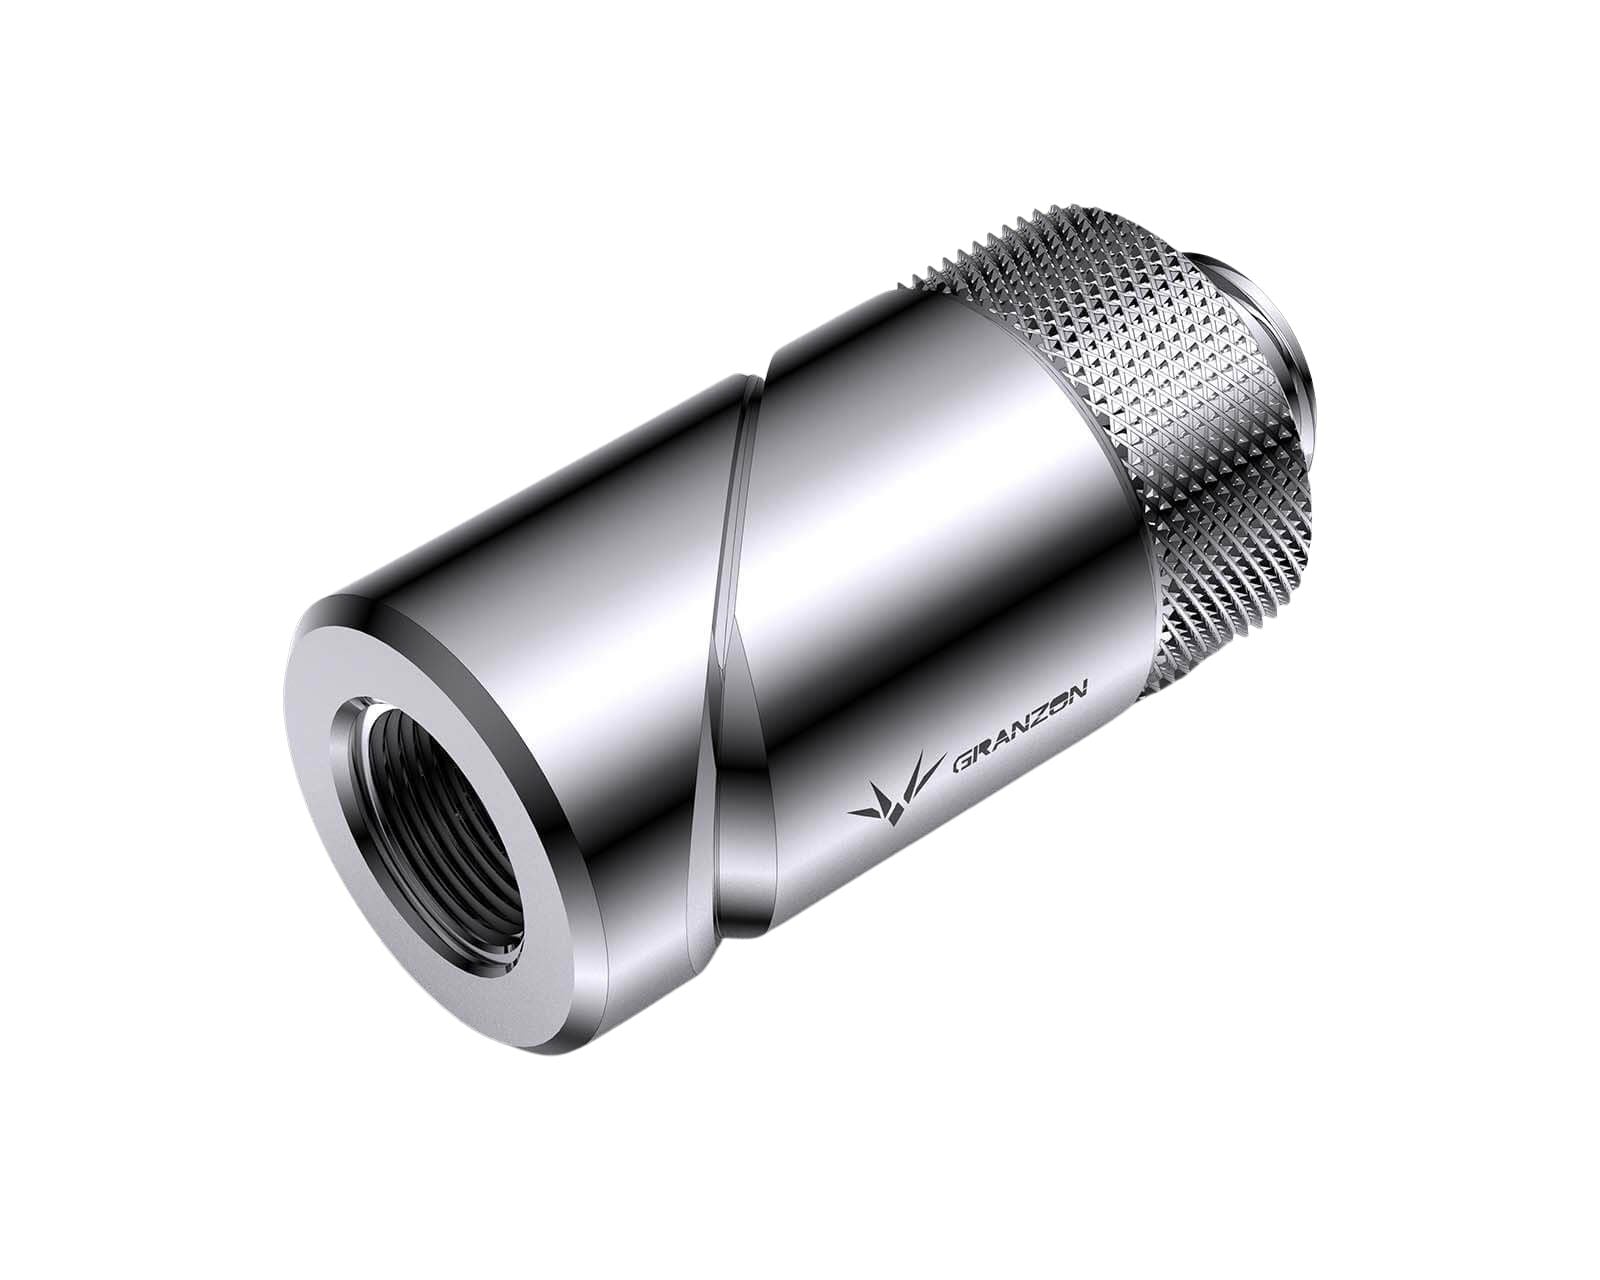 Granzon G 1/4in. Male to Female 0 - 90 Degree Multi Directional Rotary Elbow Fitting(GD-SK) - PrimoChill - KEEPING IT COOL Silver